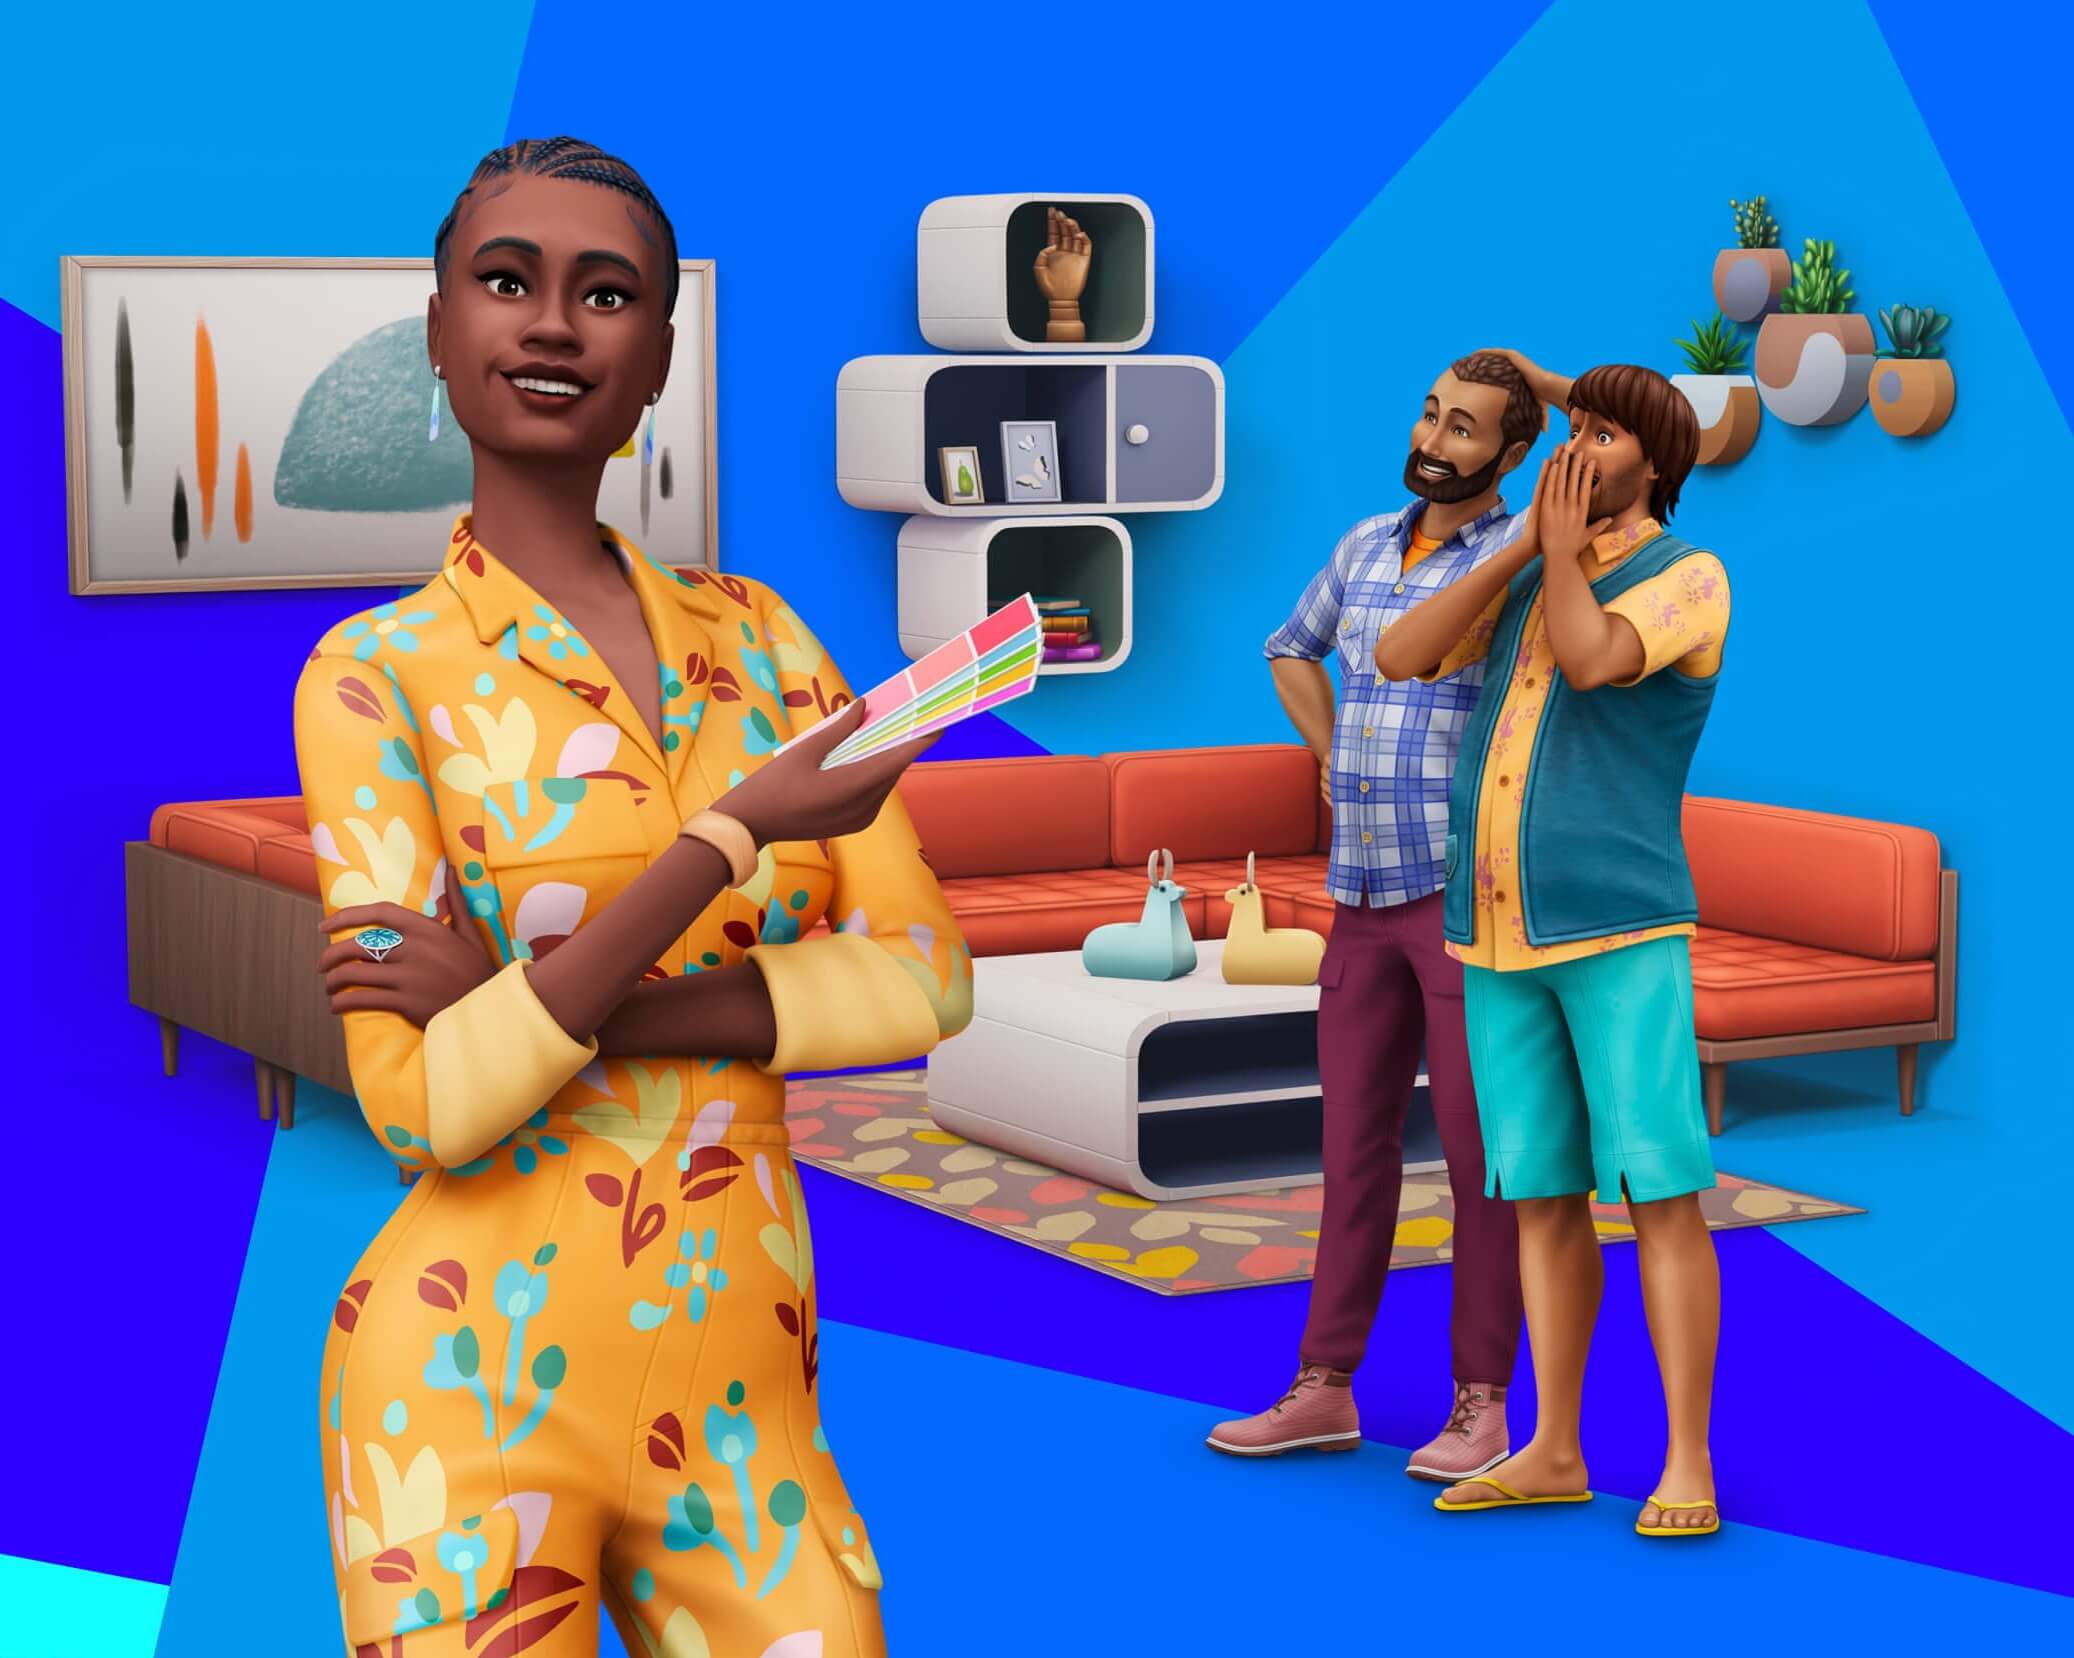 sims 4 all expansions 2017